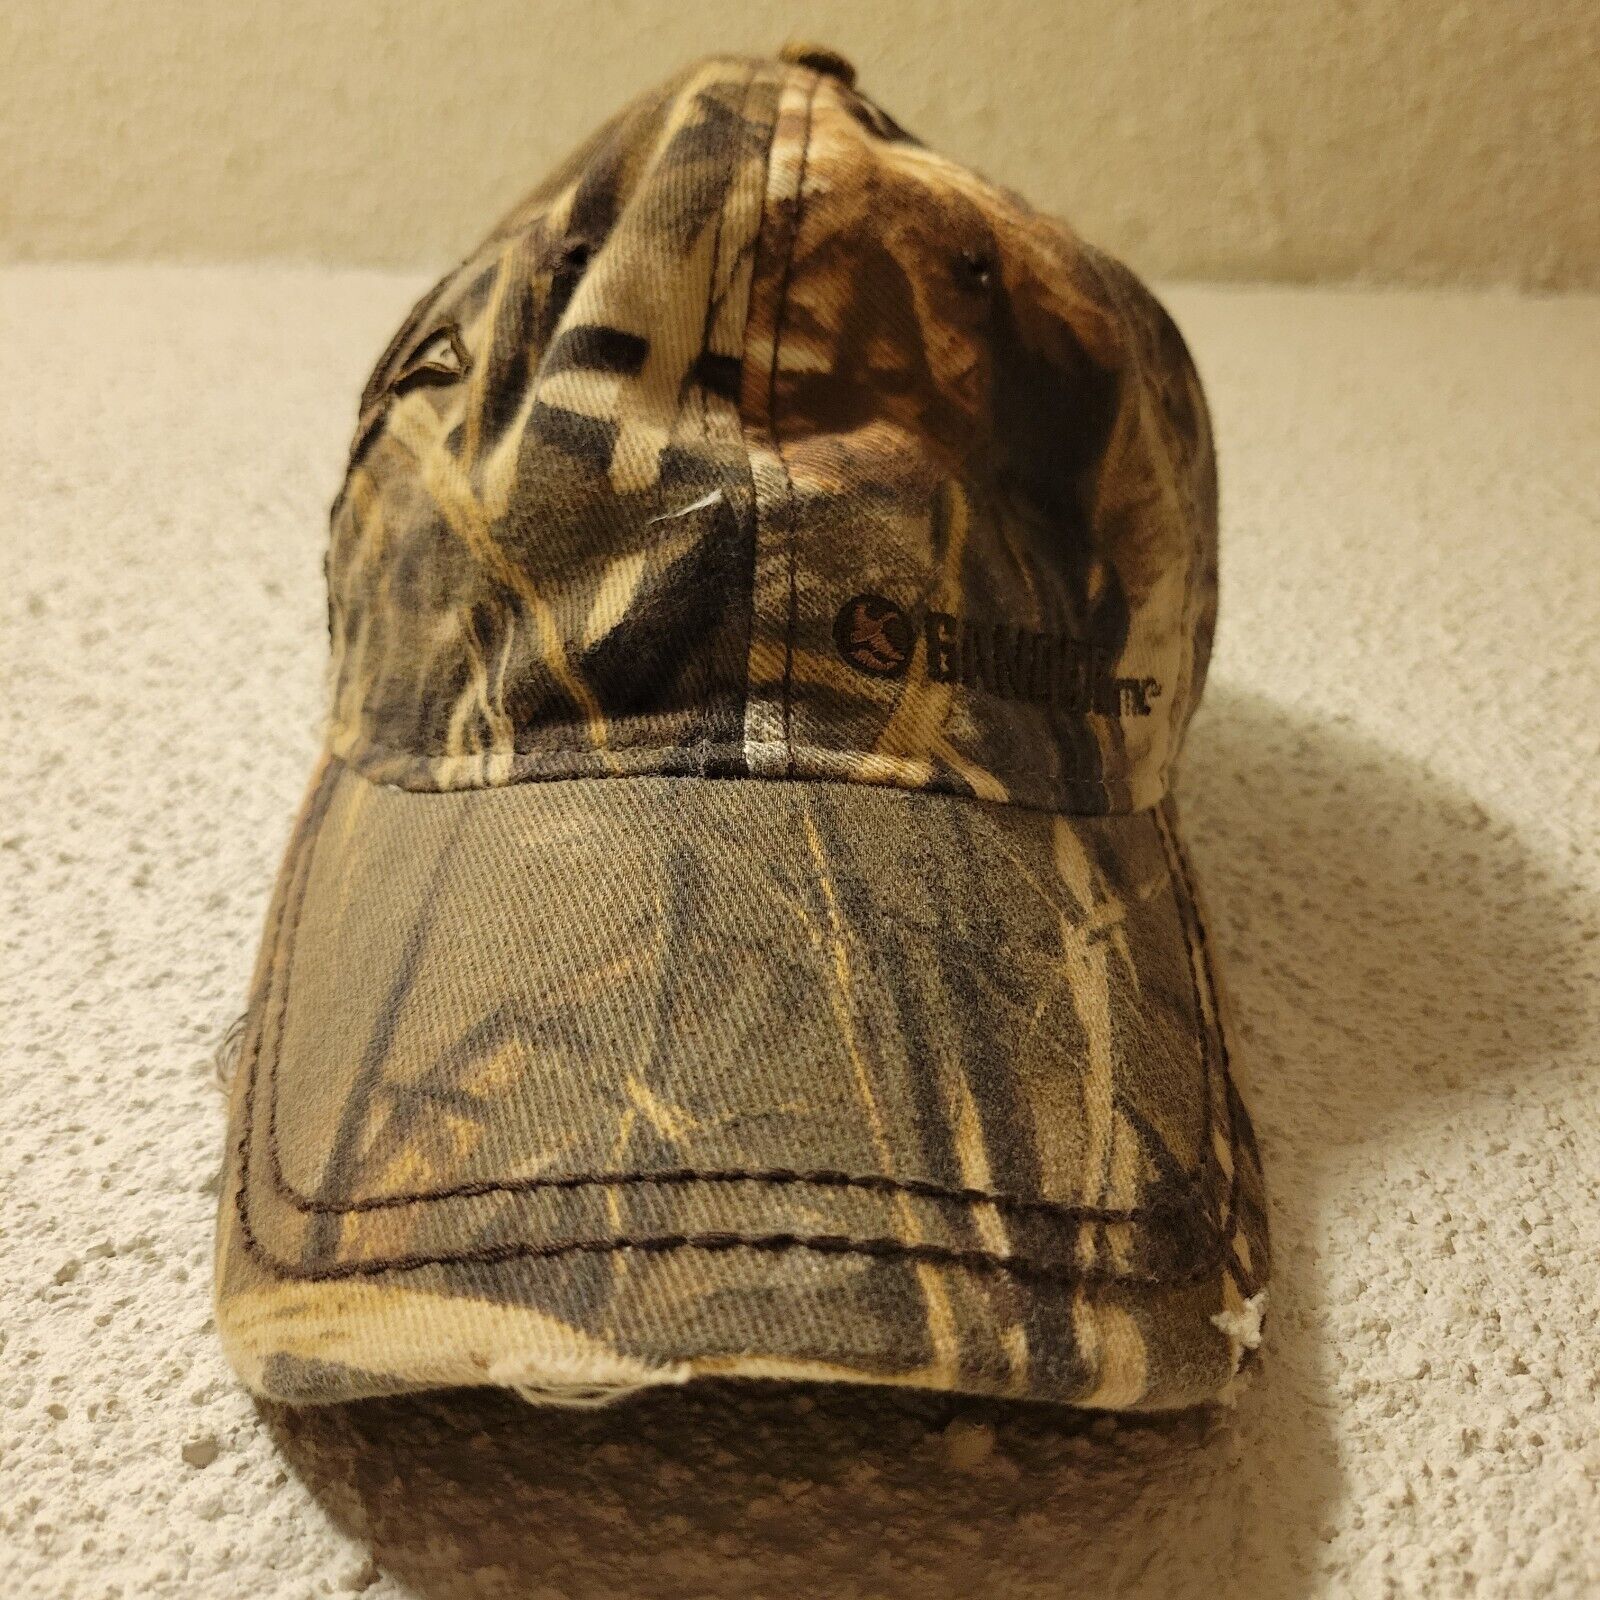 Primary image for Gander Mountain MTN Logo Camouflage Duck Embroidered Hat Cap Adjustable